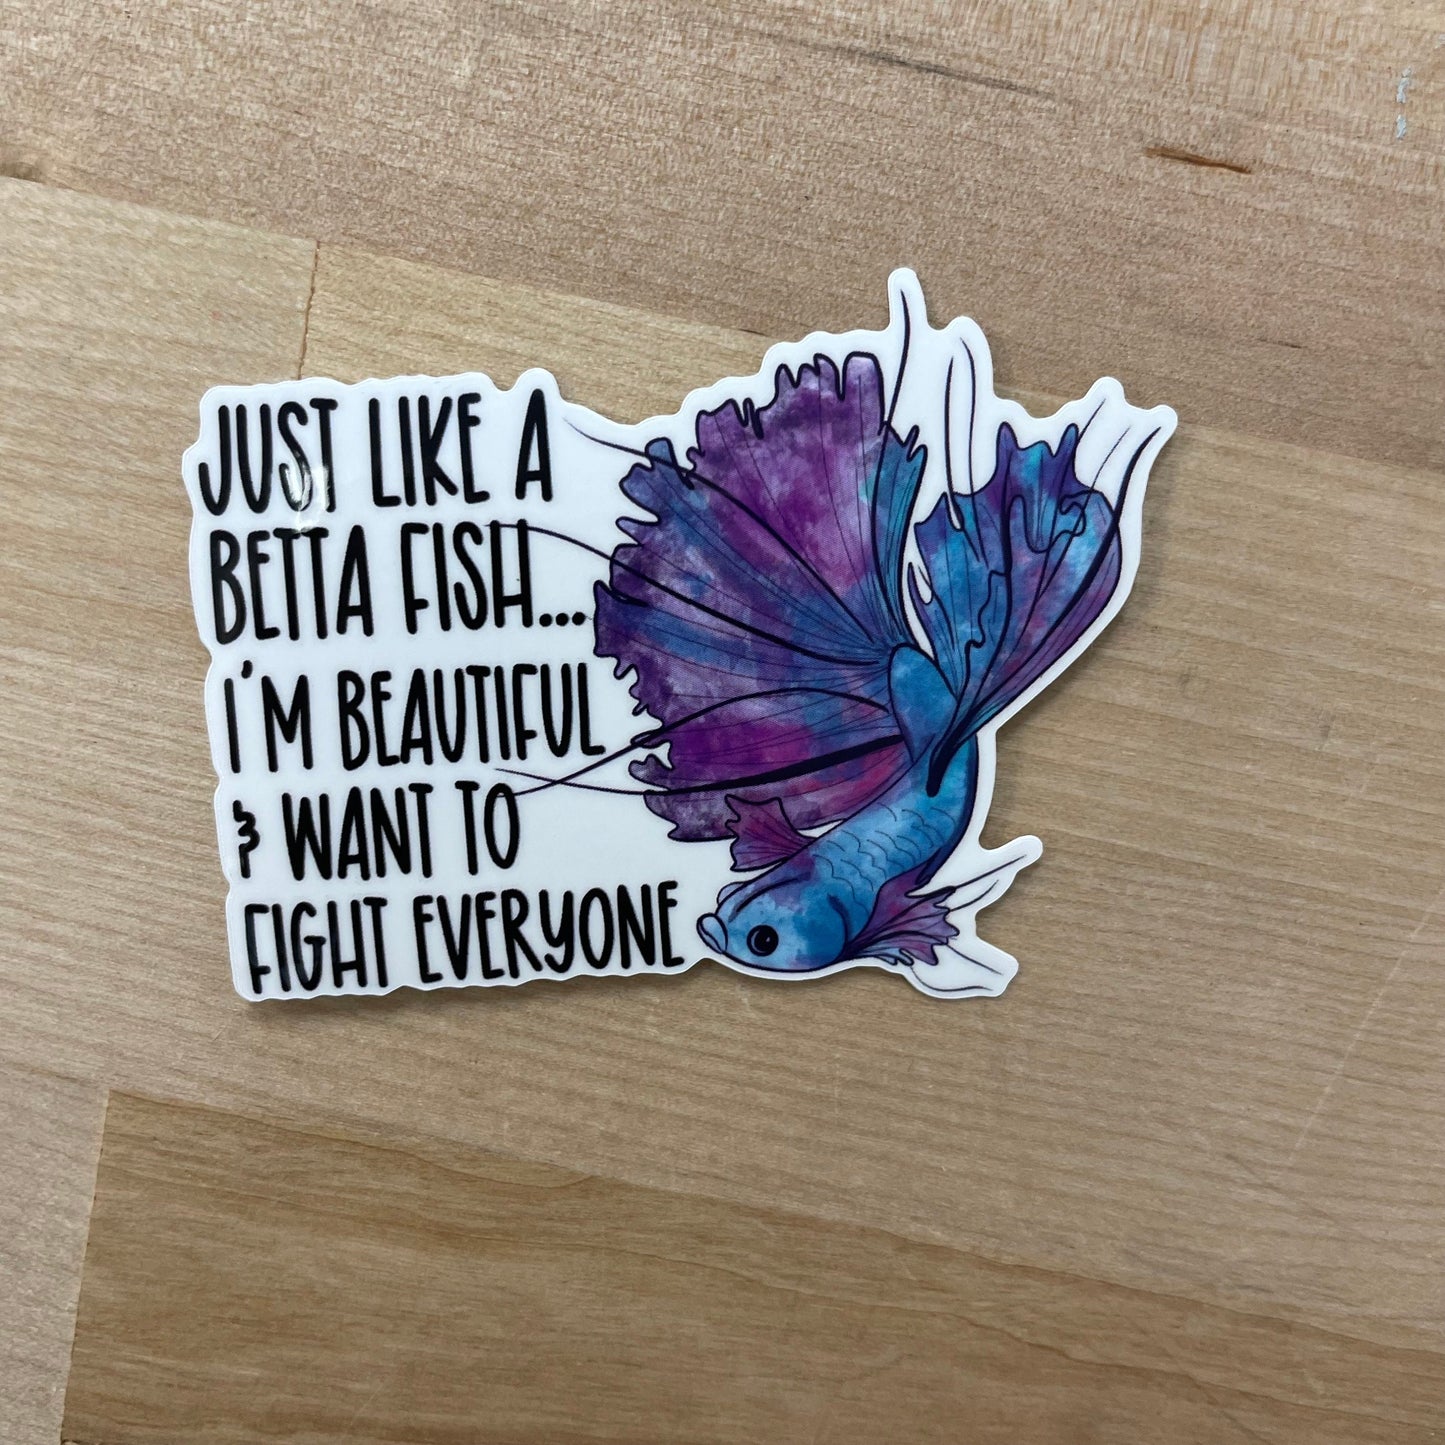 Just like a betta fish I’m beautiful and want to fight everyone, 3” Sticker